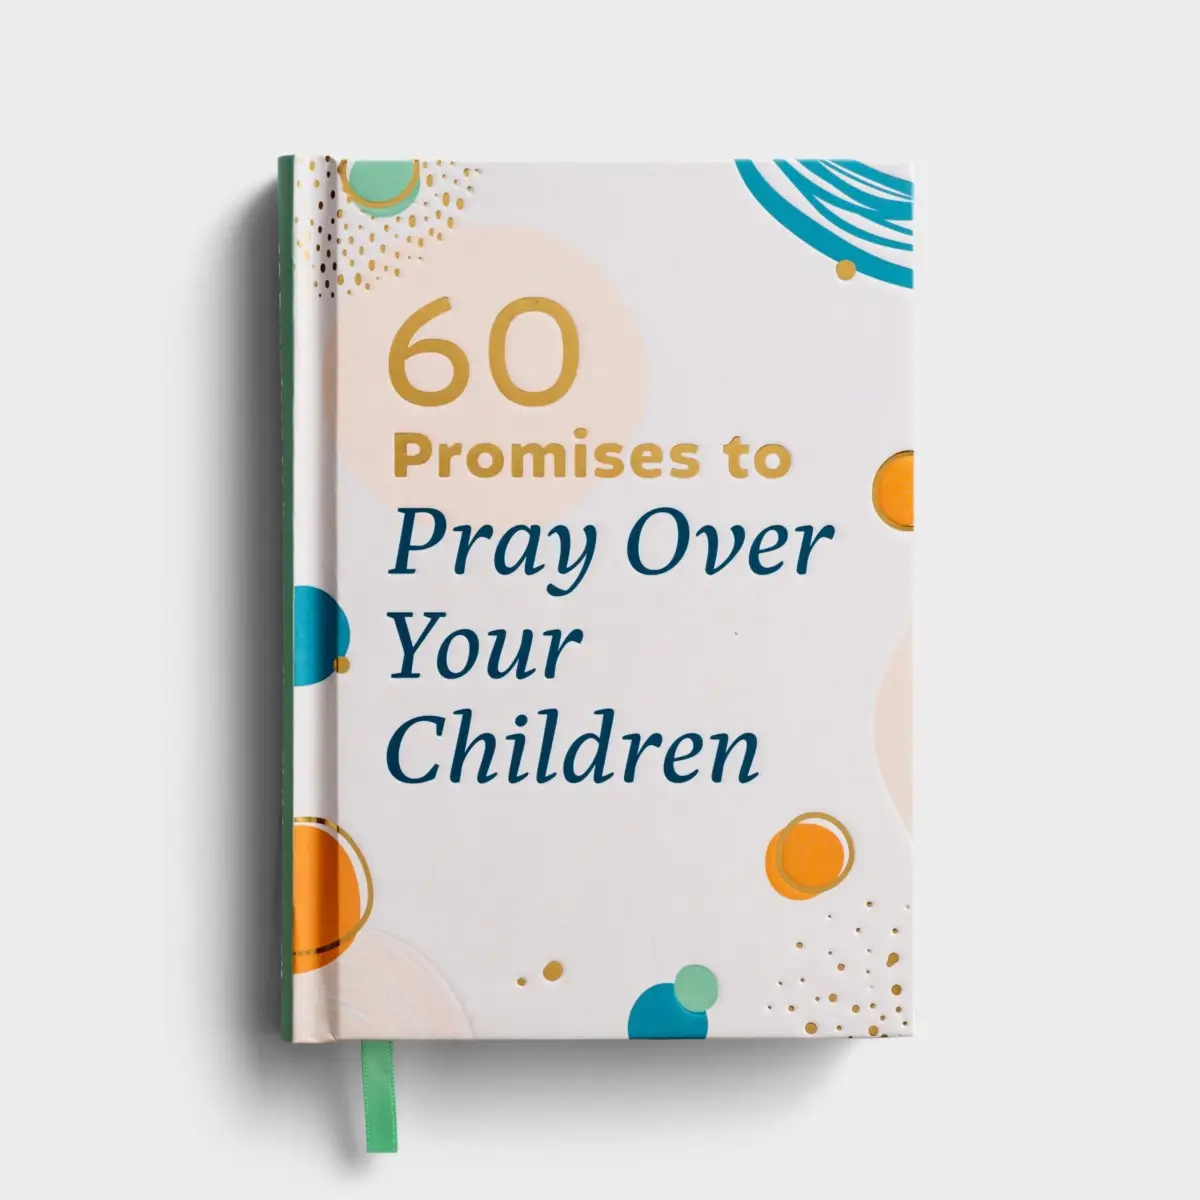 60 Promises to Pray Over Your Children (Hardcover)